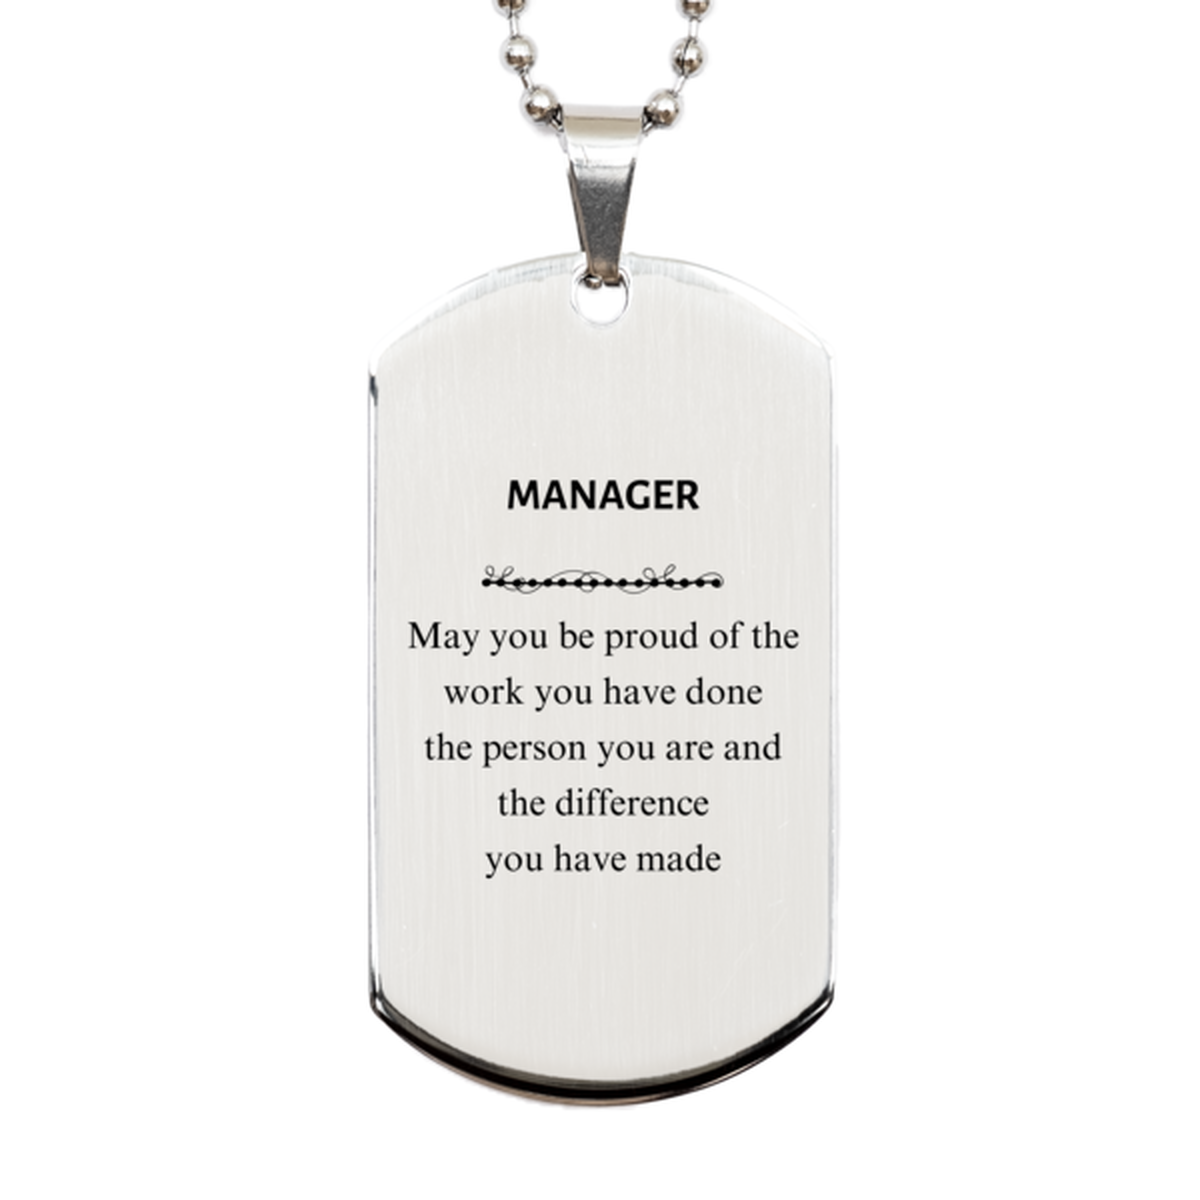 Manager May you be proud of the work you have done, Retirement Manager Silver Dog Tag for Colleague Appreciation Gifts Amazing for Manager